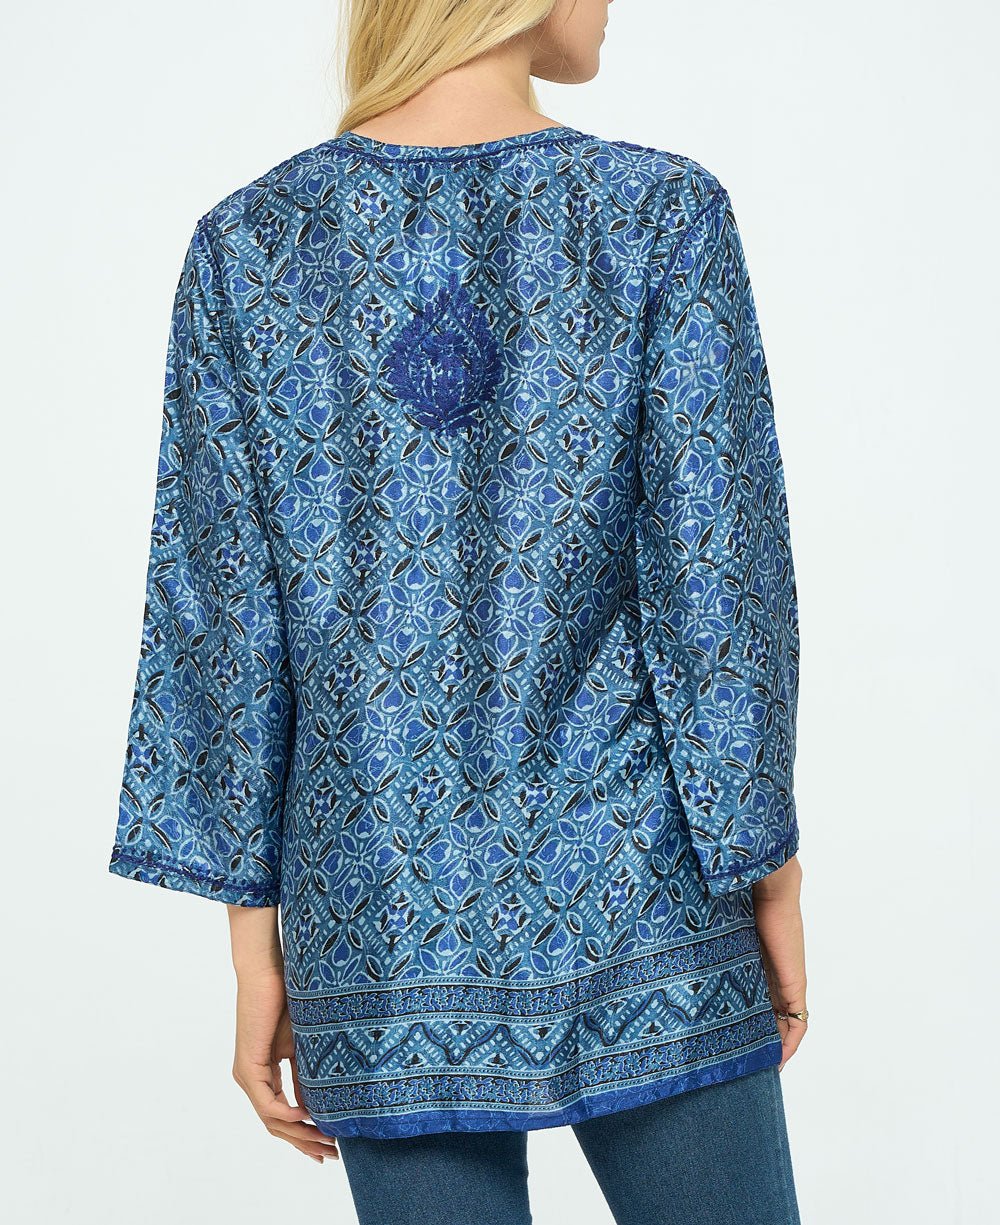 Blue Geometry Tunic With Hand Embroidery - Shirts & Tops S